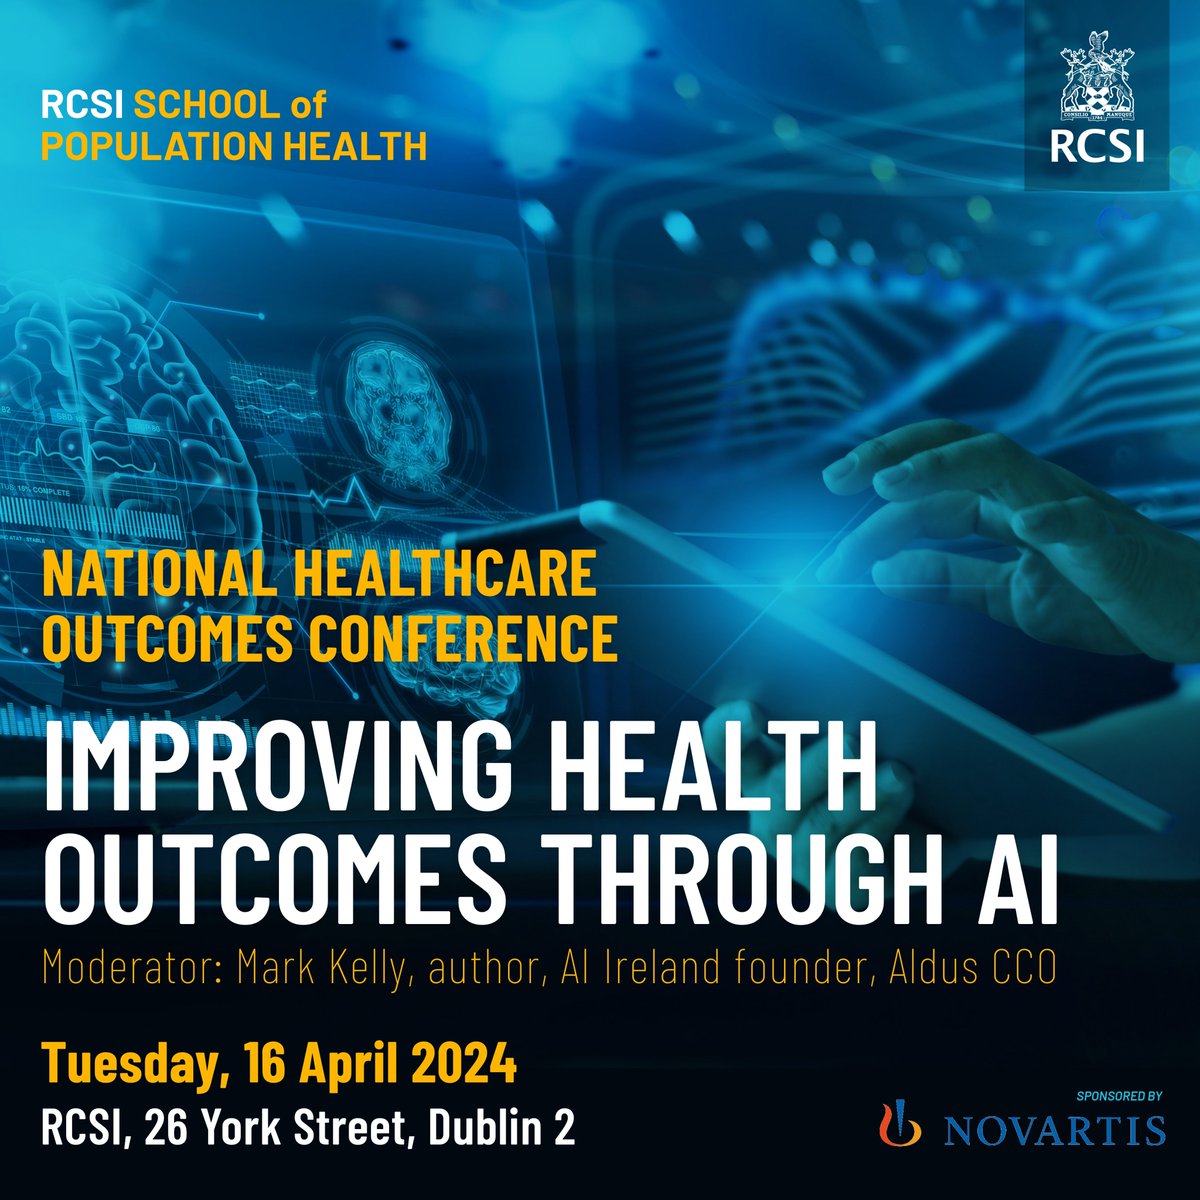 Our National Healthcare Outcomes Conference will see @DrPVarkey, @MayoClinic President and Mark Kelly, @AIAwardsIrl Founder discuss how AI innovations could transform healthcare. Join us next Tuesday, 16 April. Register at rcsi.com/nhoc Supported by @NovartisIreland